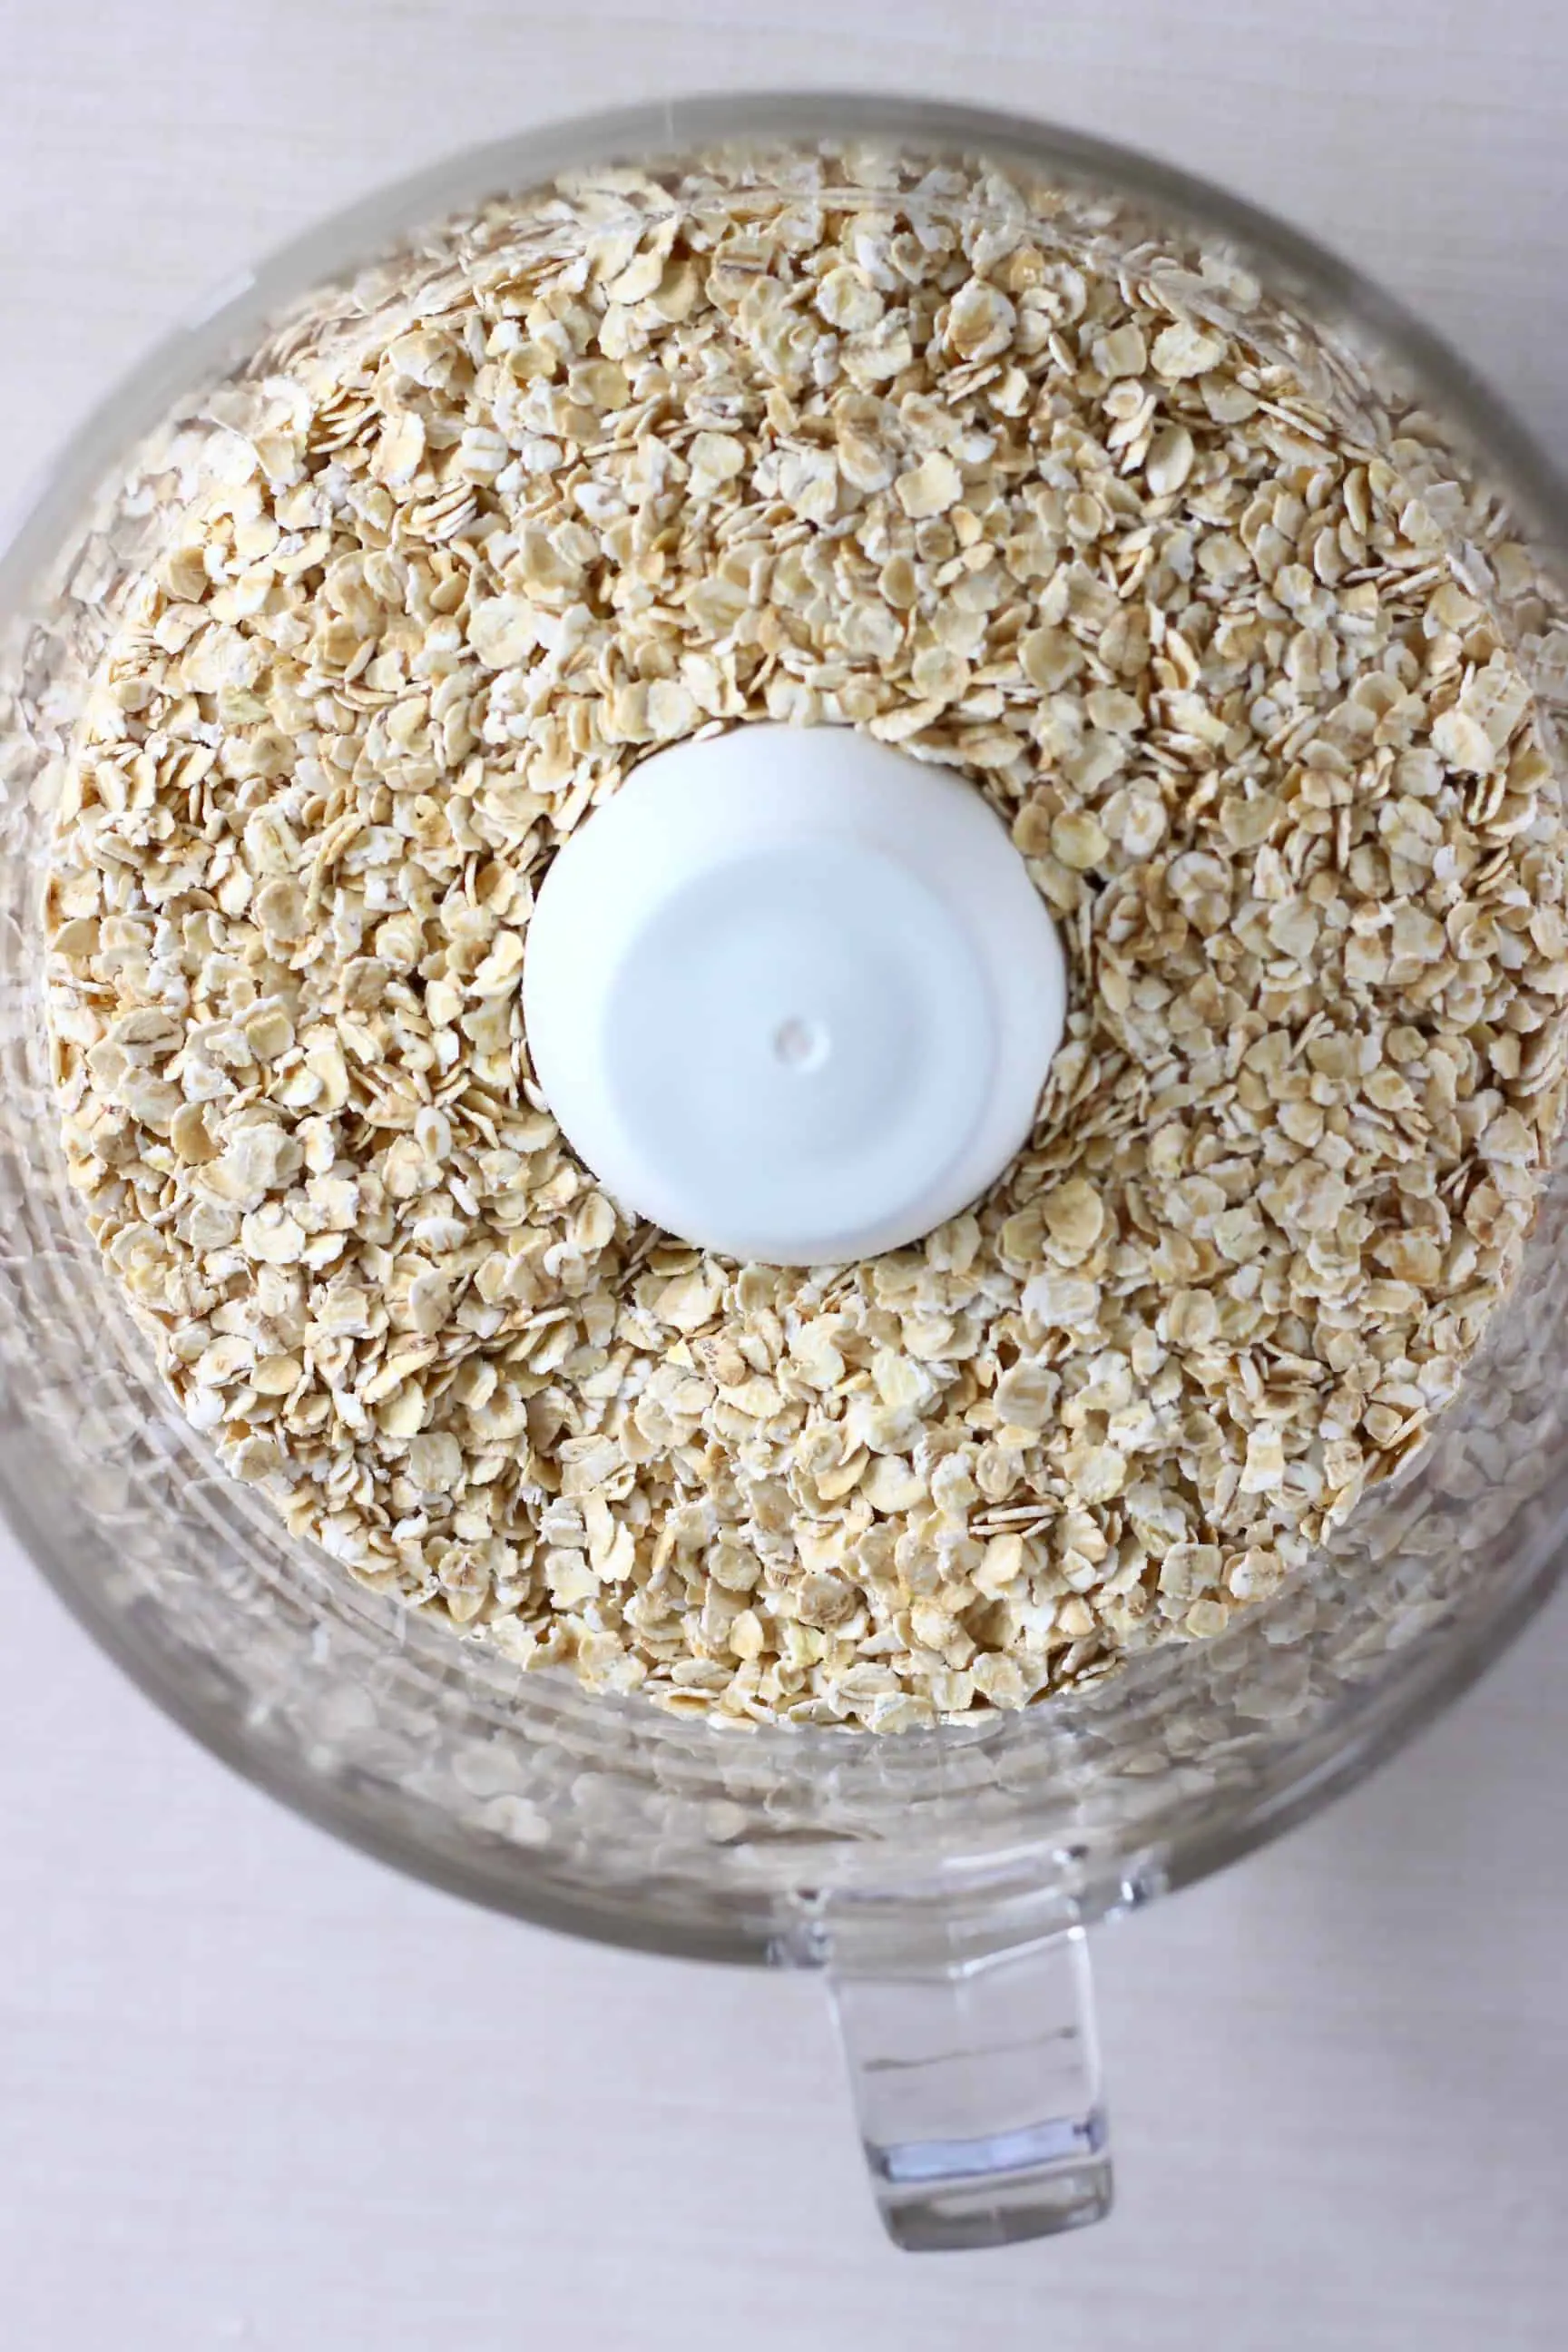 Oats in a food processor against a white background